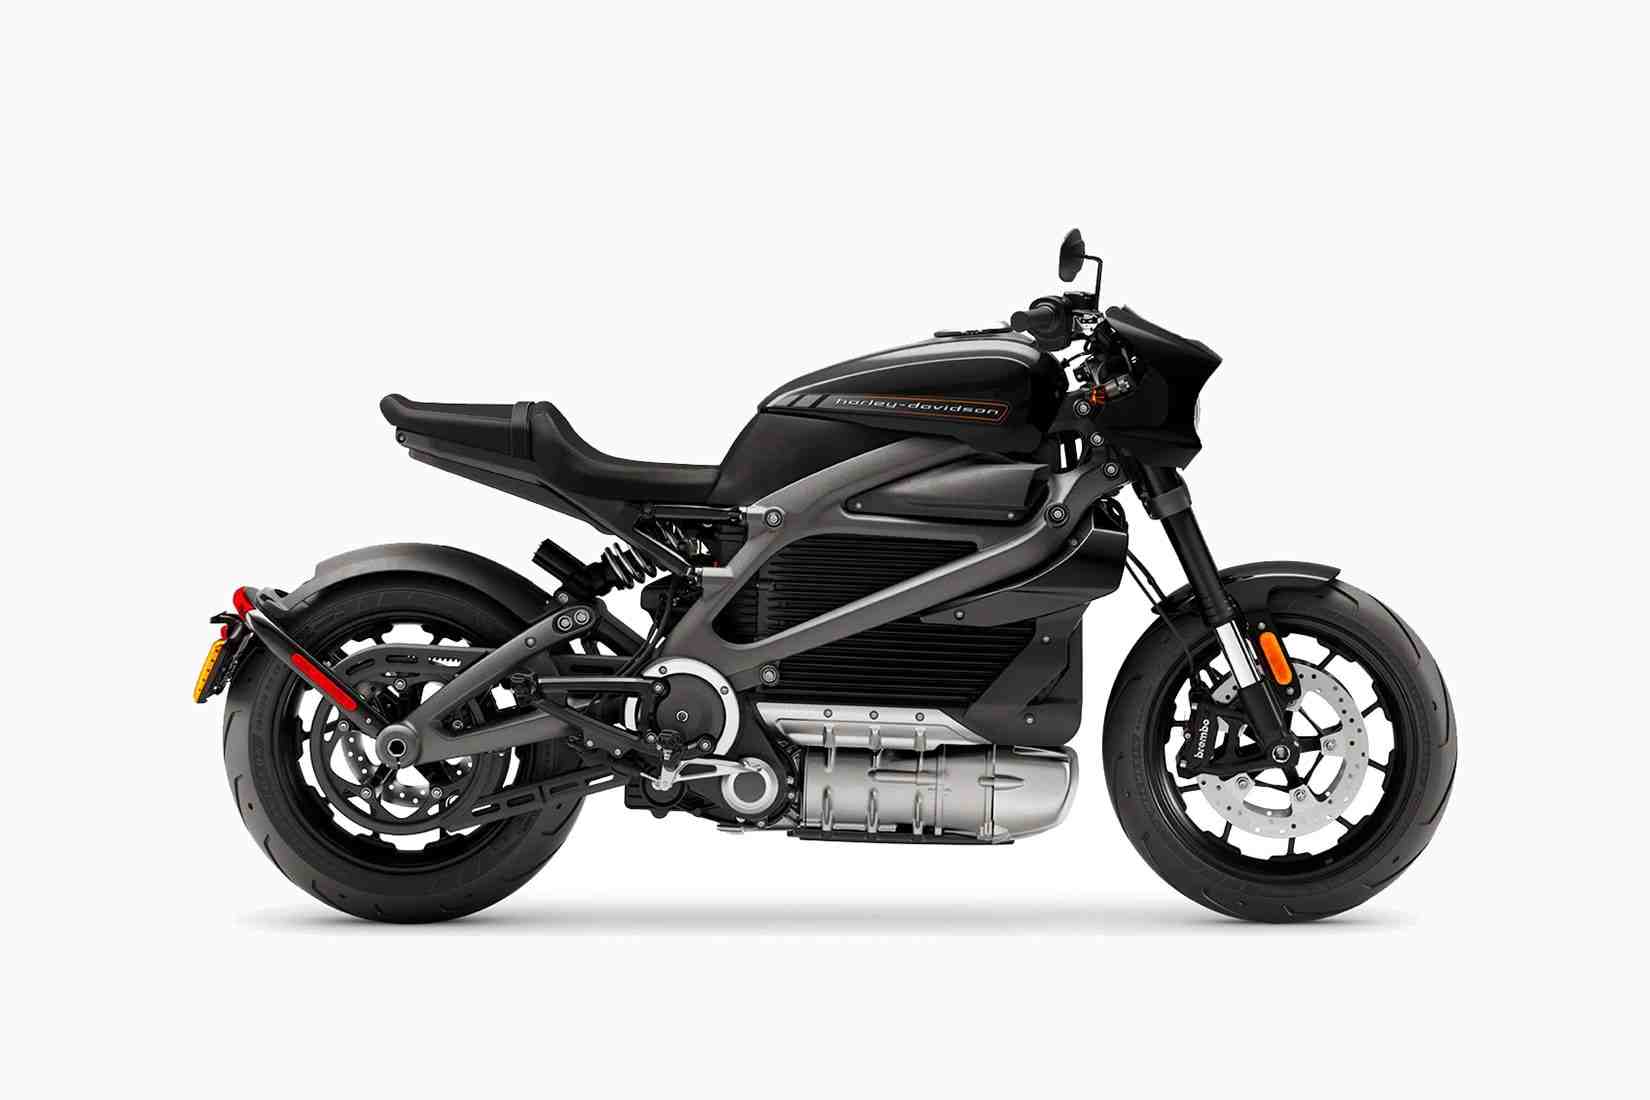 How far can an electric motorcycle go on one charge?